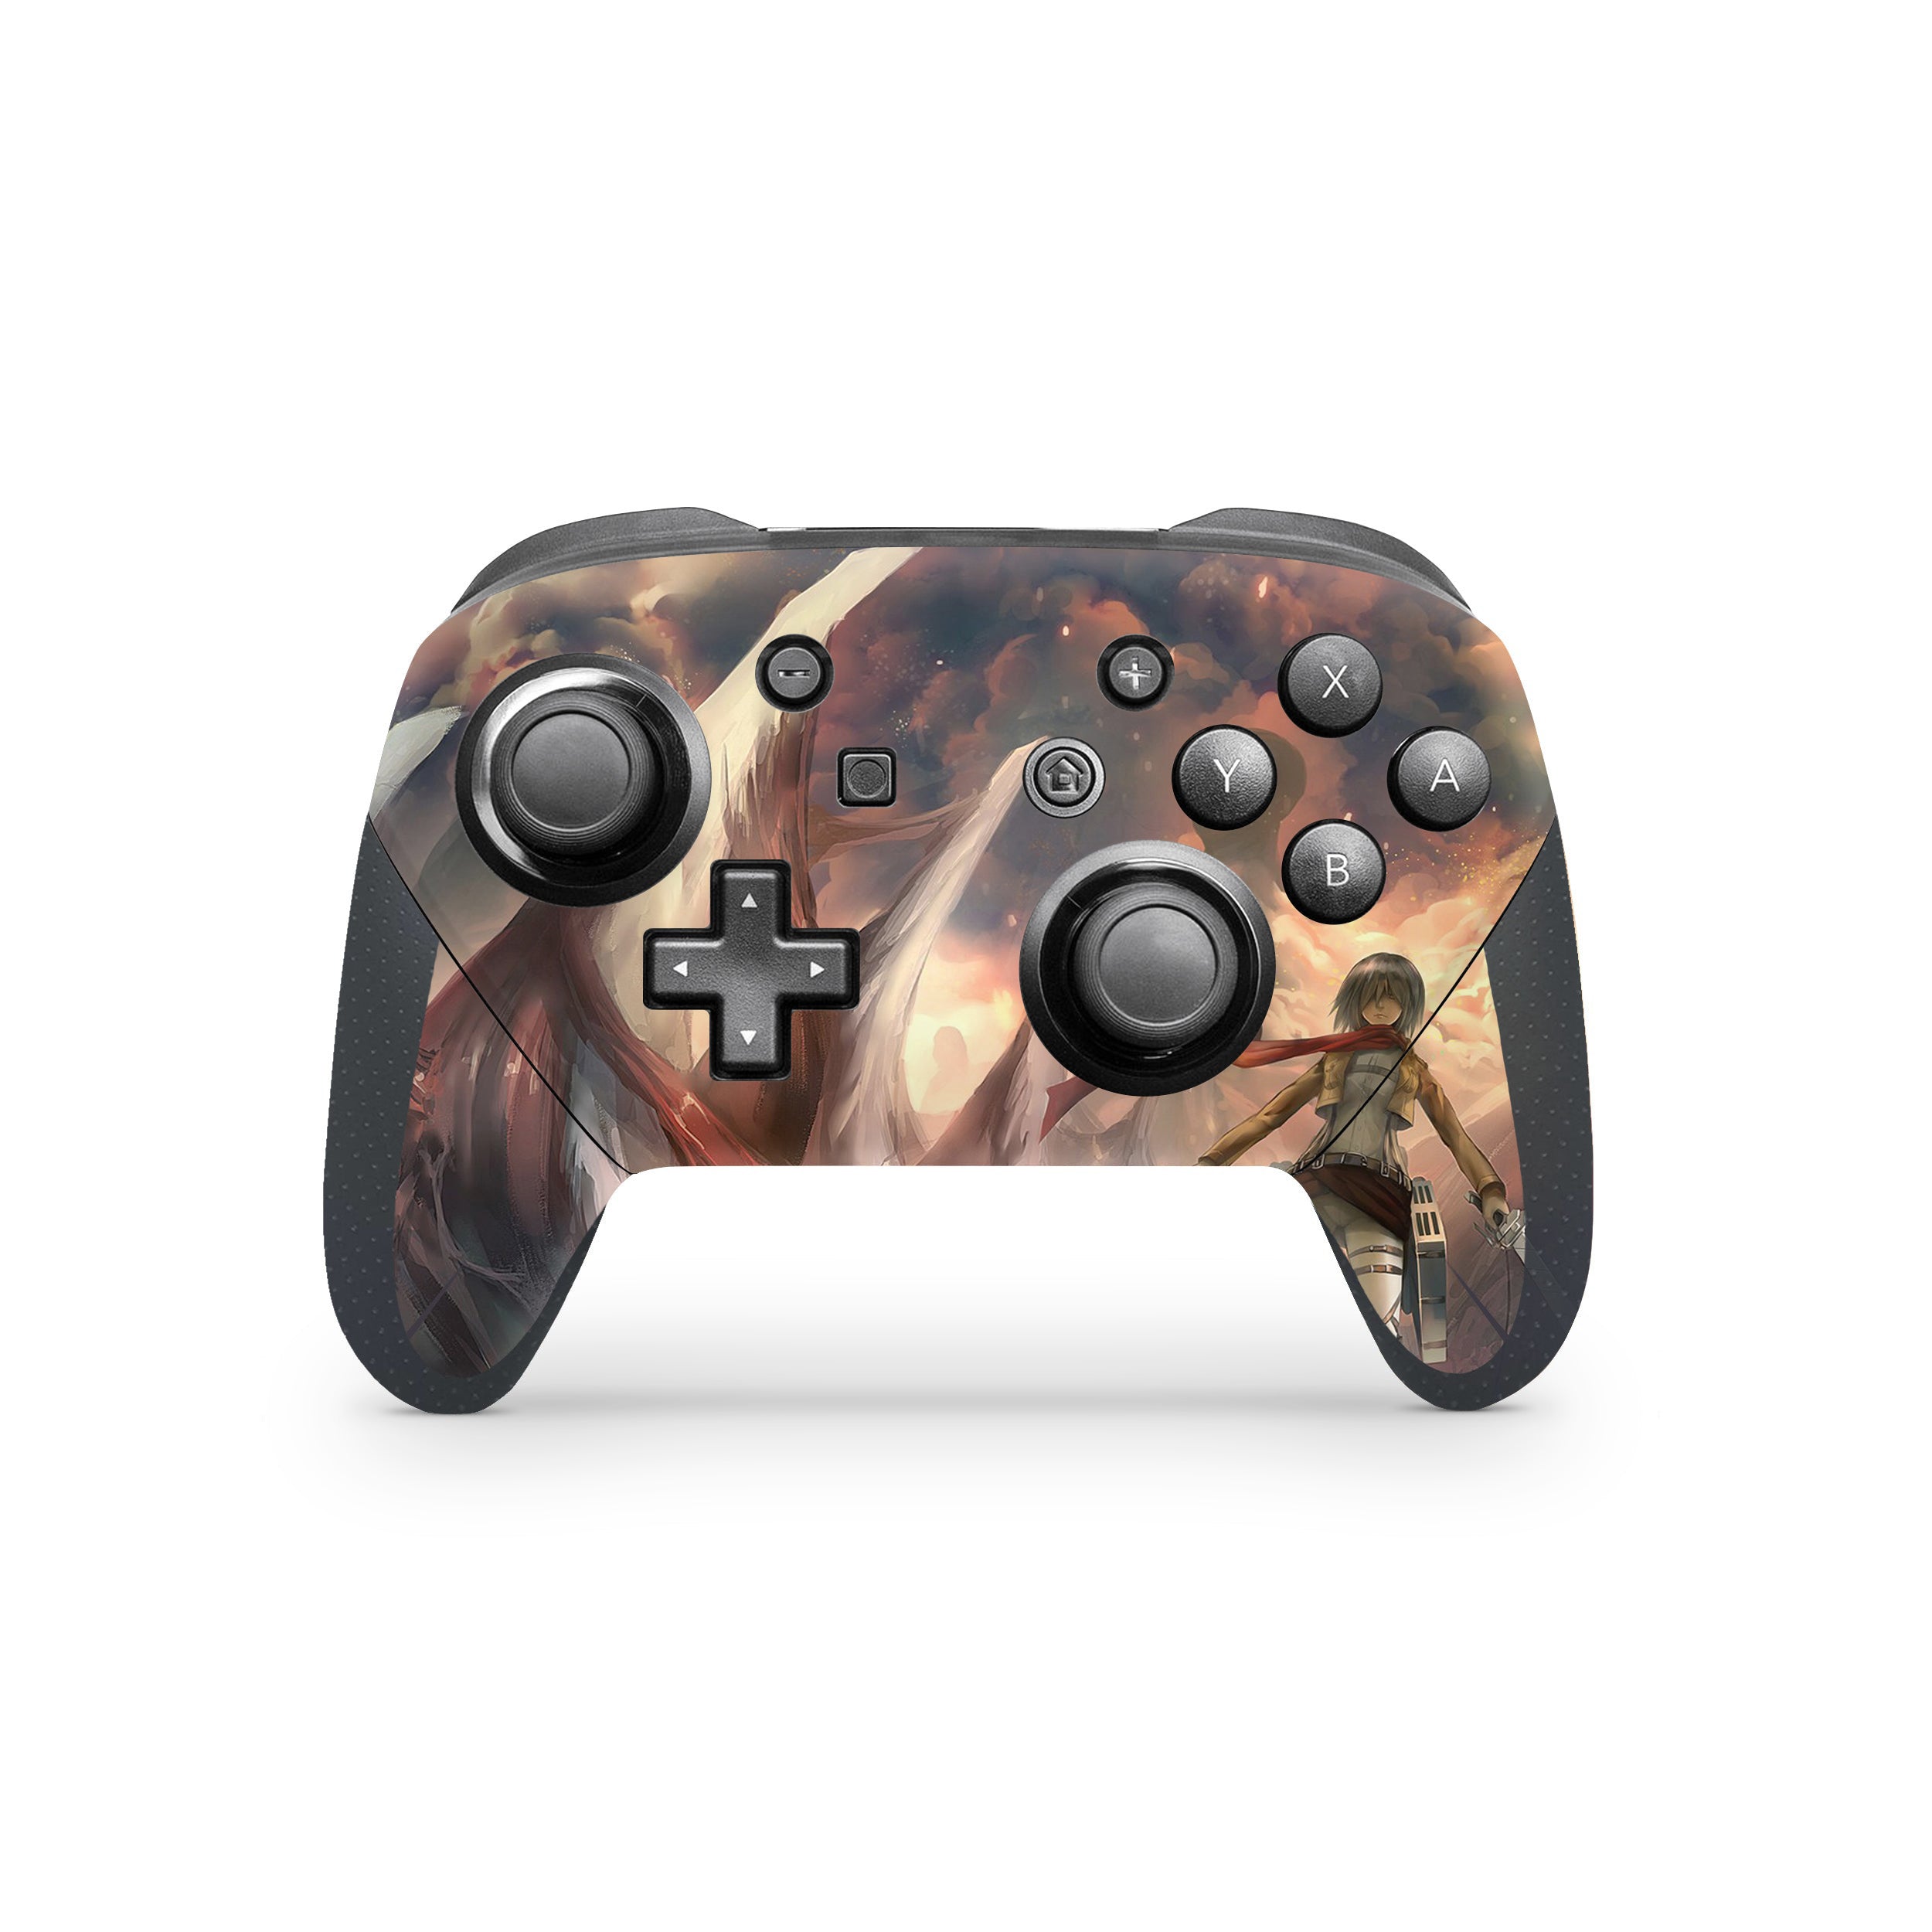 A video game skin featuring a Attack On Titan Mikasa Ackerman design for the Switch Pro Controller.